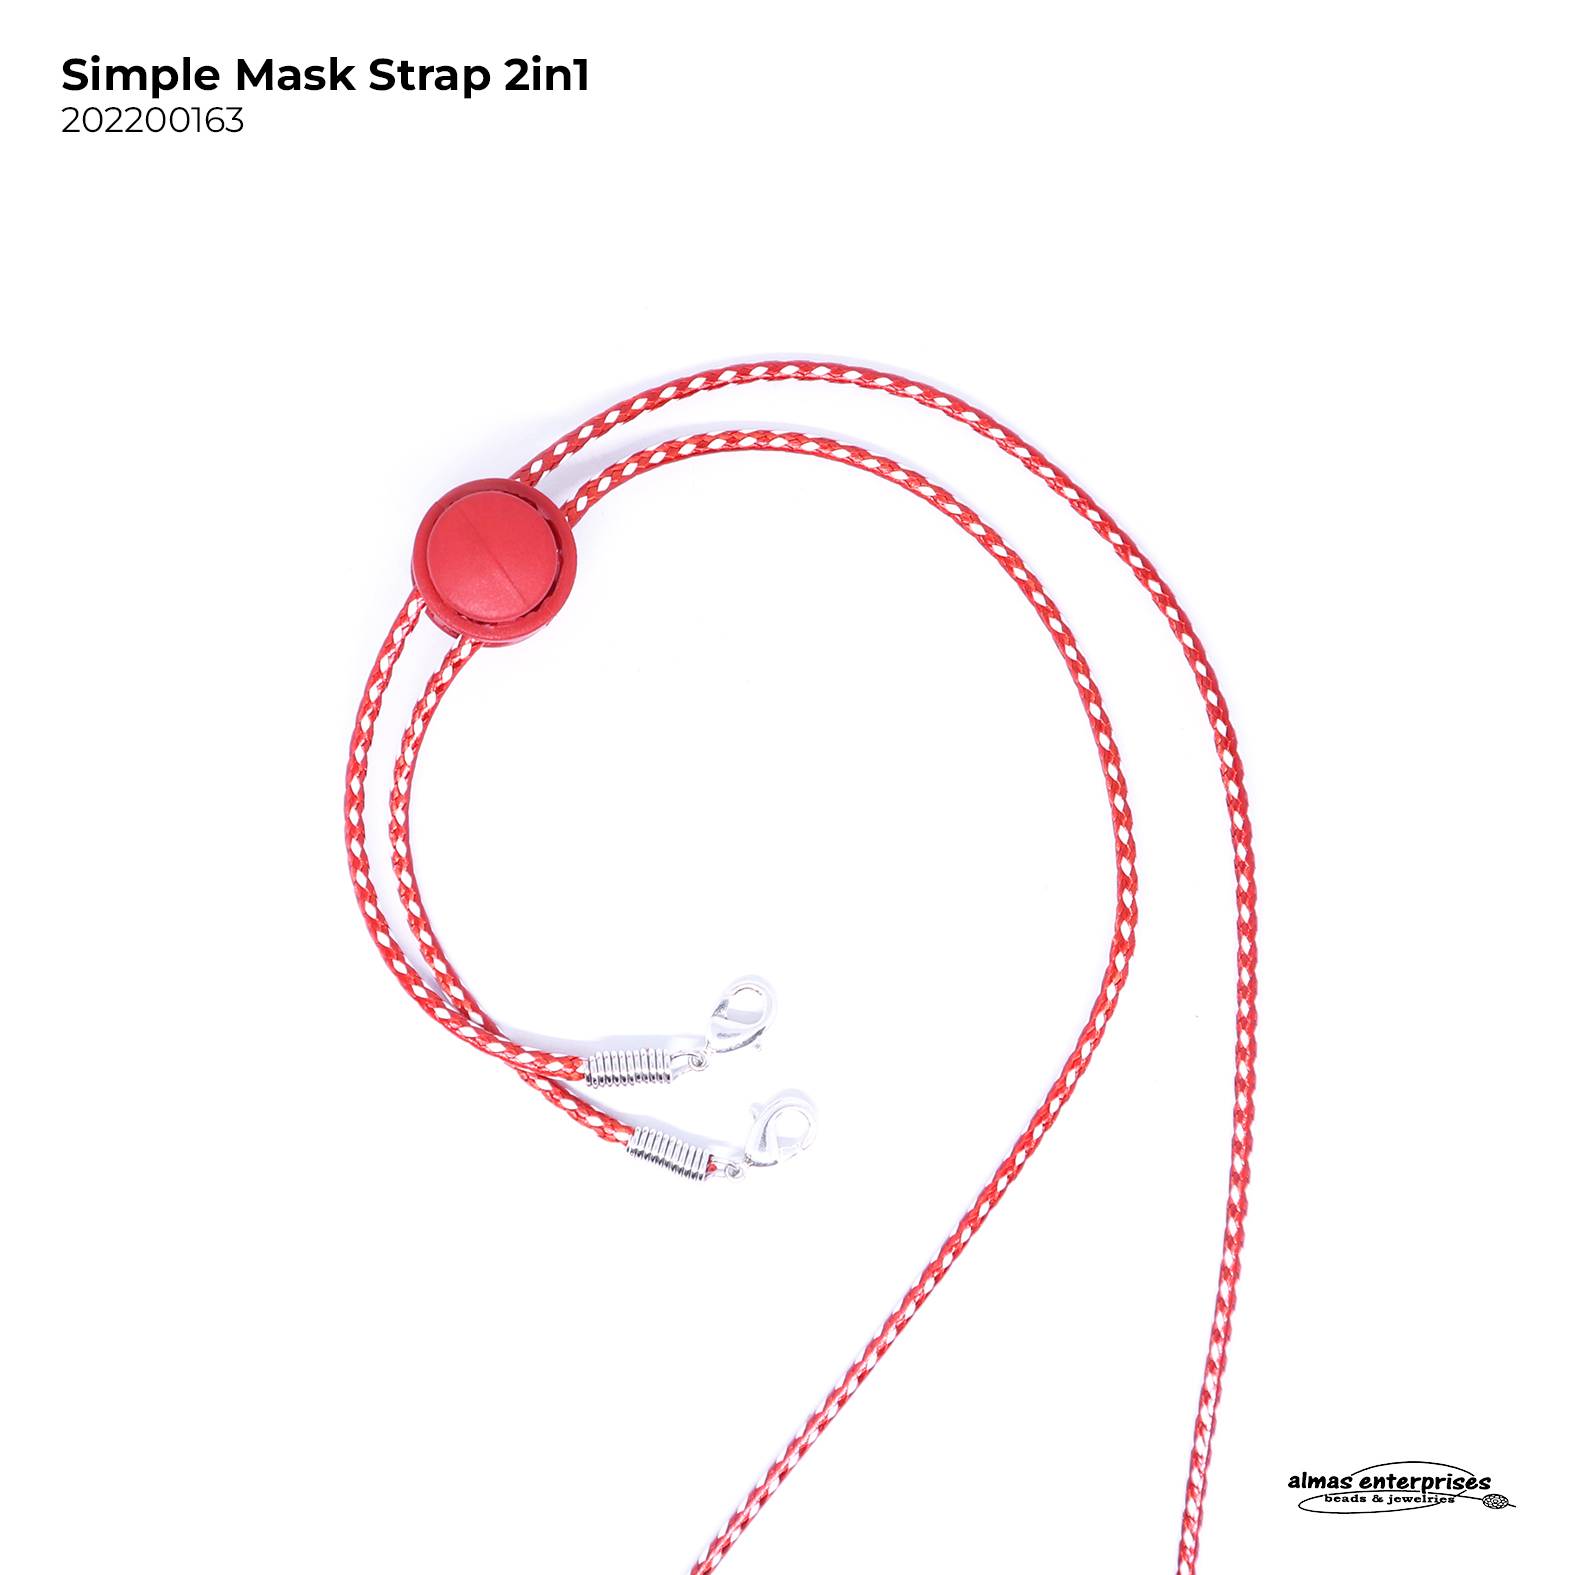 Simple Mask Strap 2in1